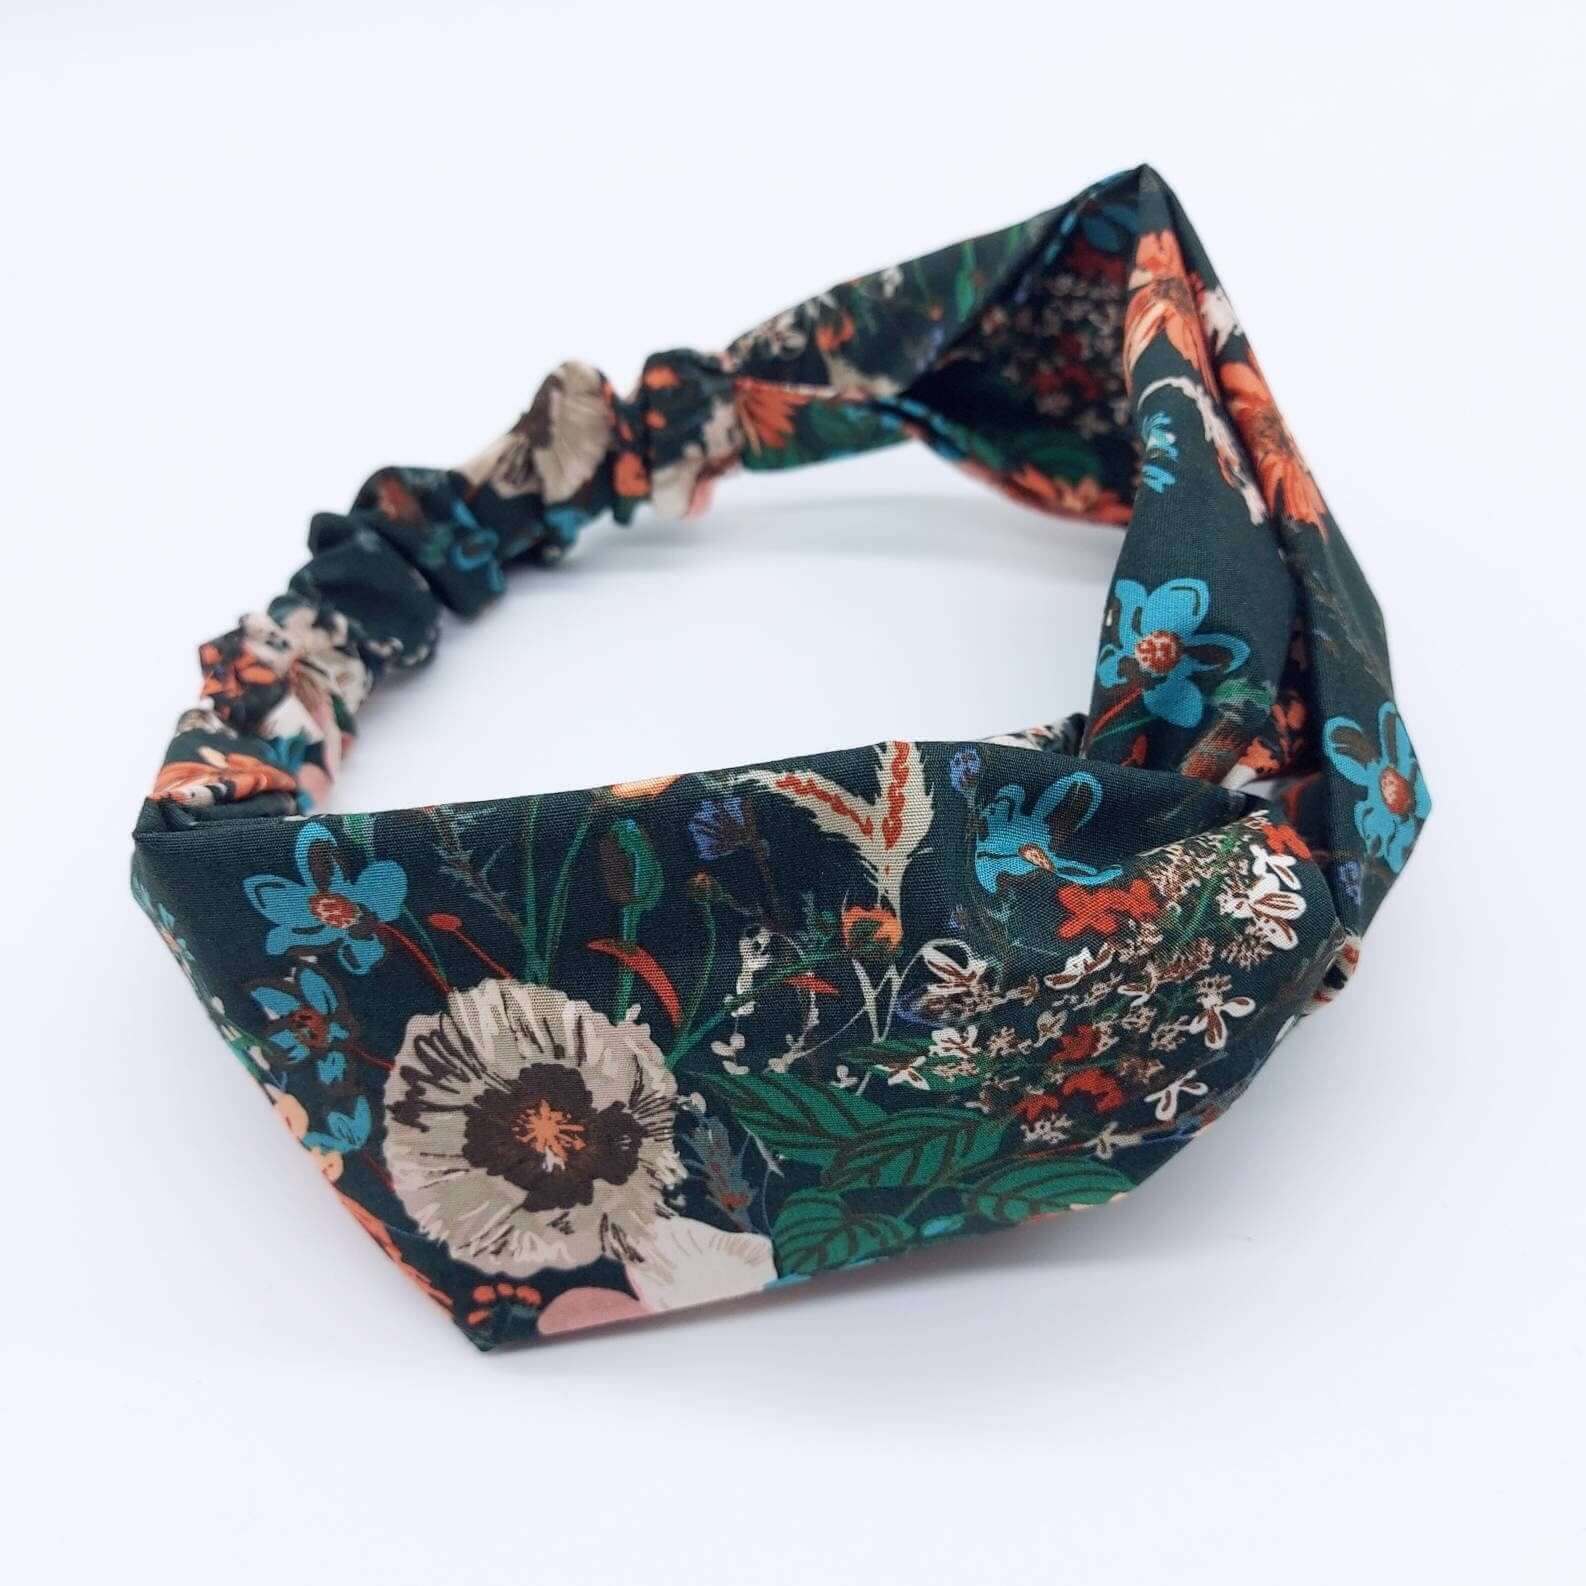 A dark green, orange and teal floral print, elasticated cotton headband, with a turban twist design at the front.